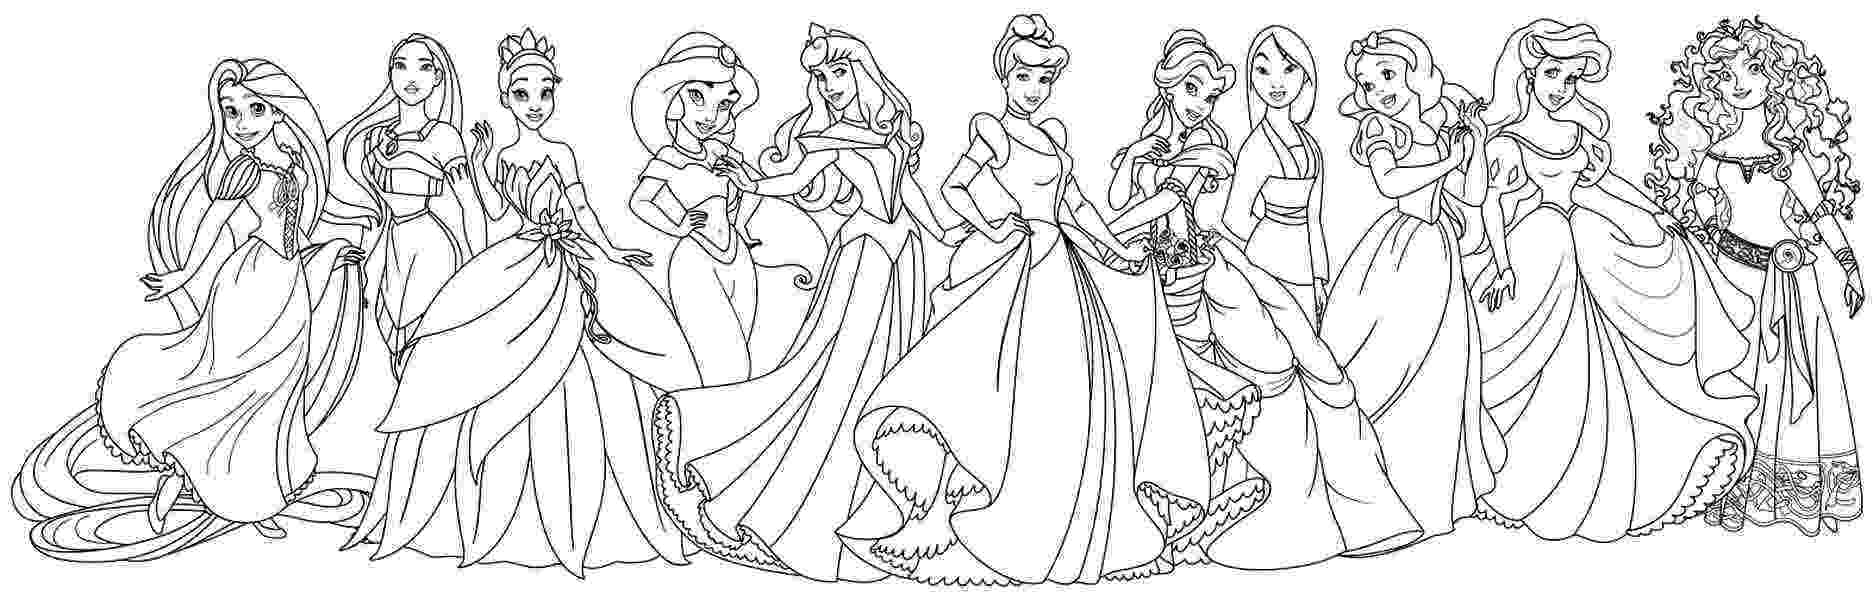 free coloring pages of all the disney princesses disney coloring pages free world pics disney the all free of princesses pages coloring 